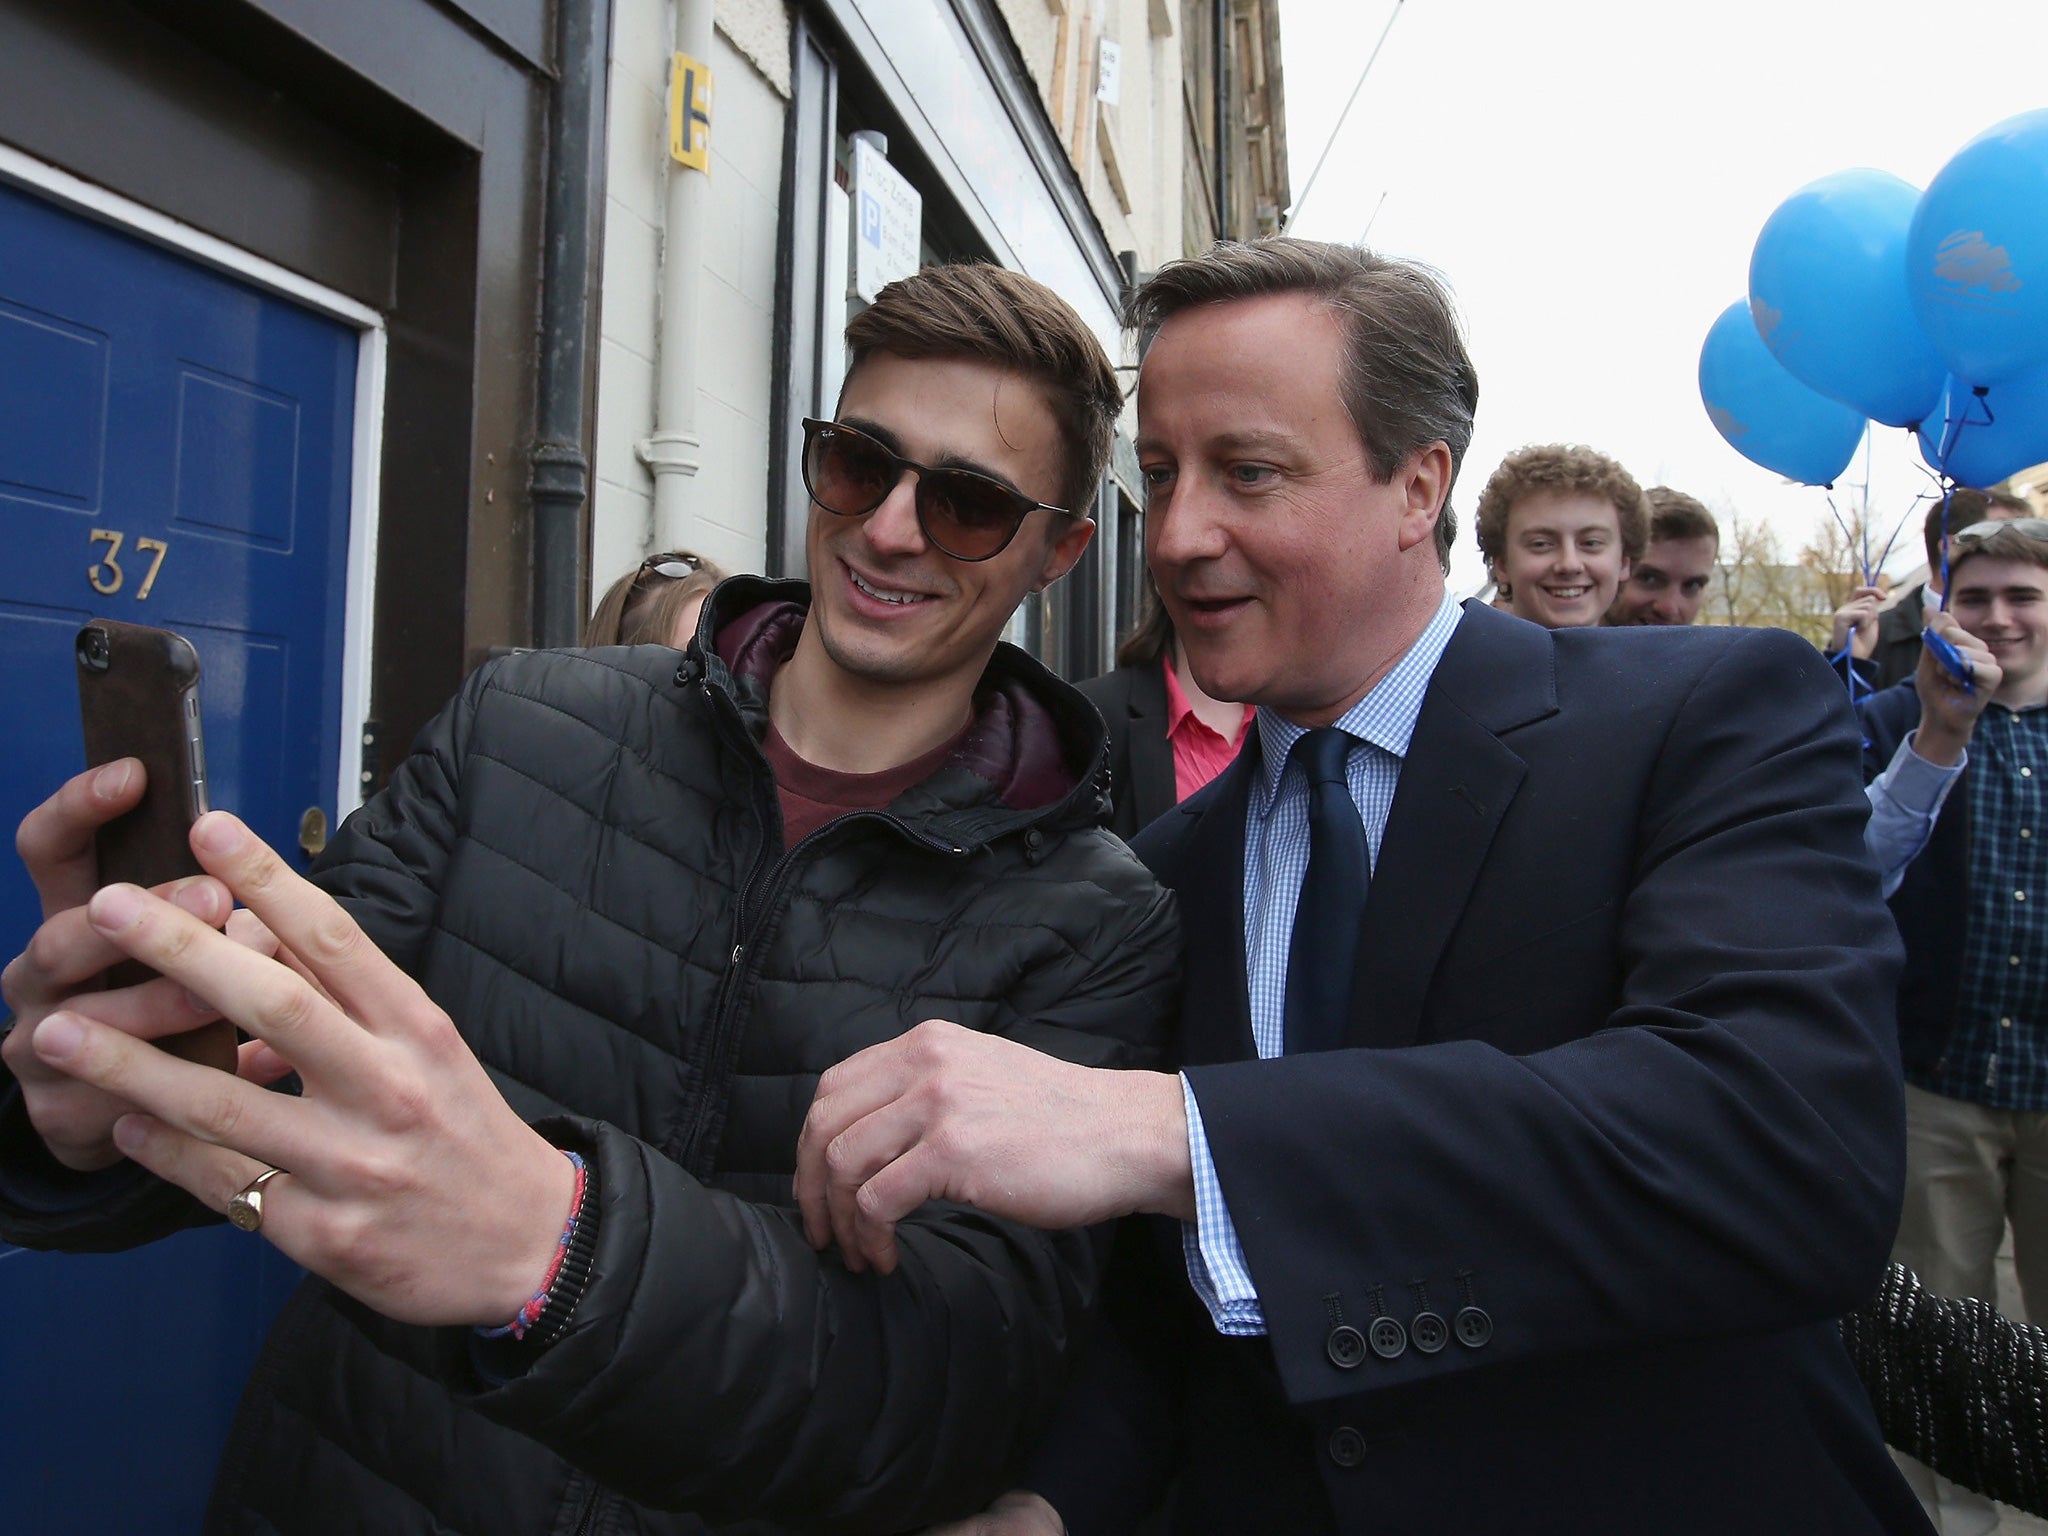 David Cameron poses for a selfie as he tours Alnwick, north-east England